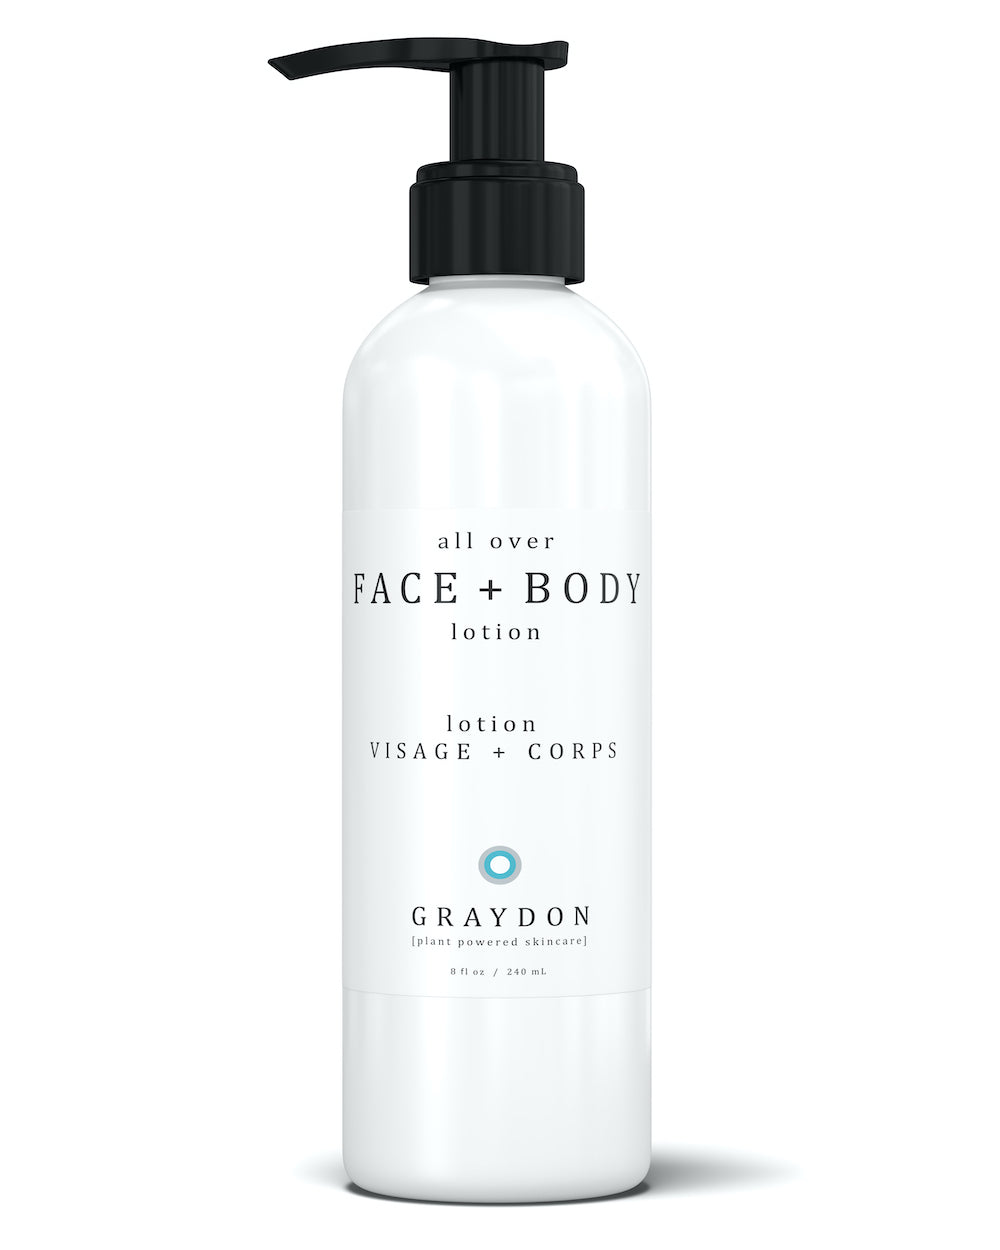 All over Face & Body Lotion - Moisturizer for Dry Skin